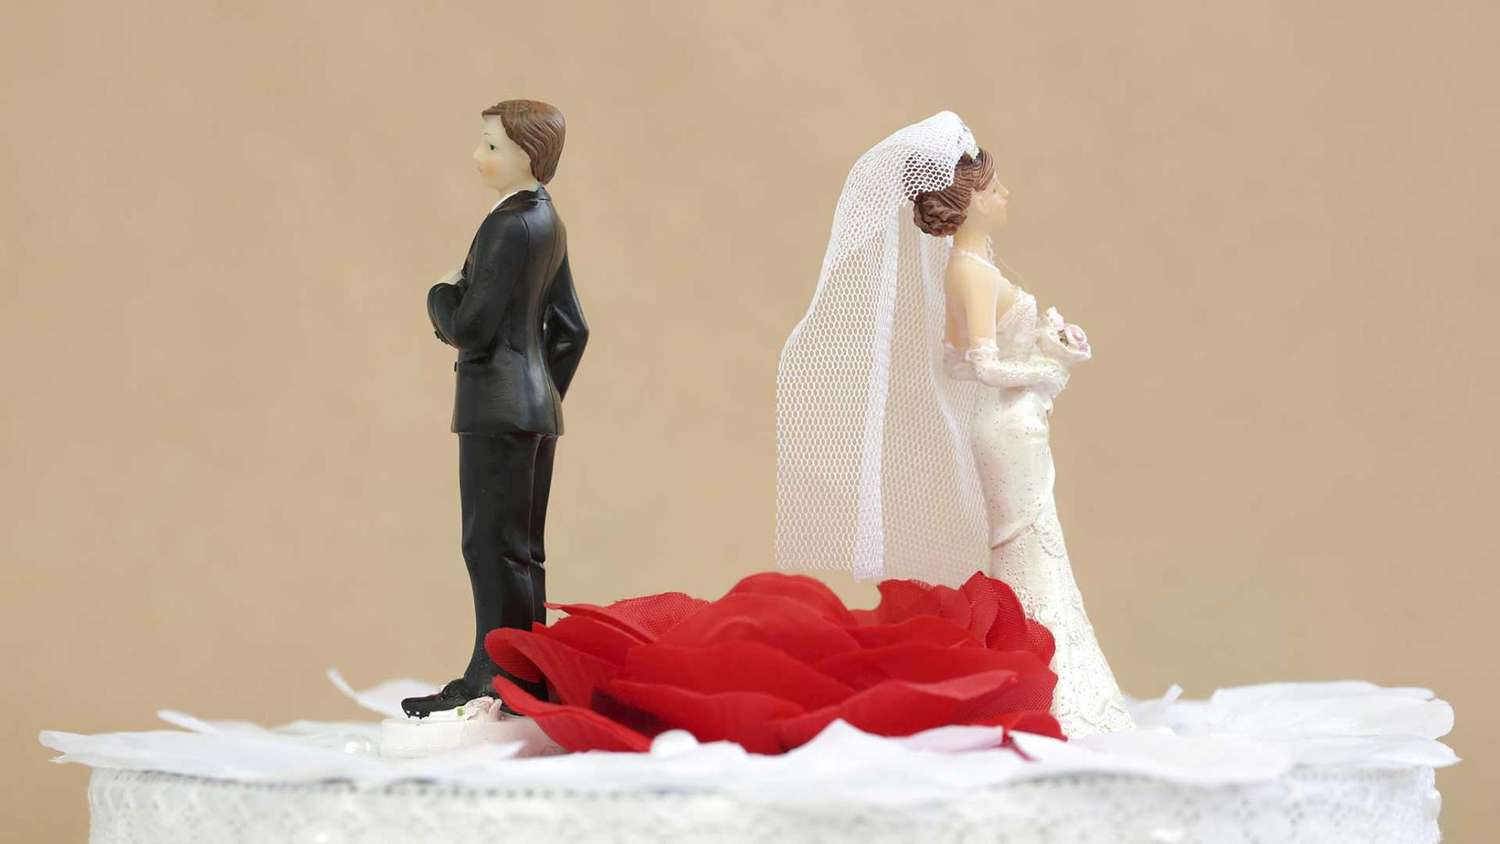 How to plan your finances when getting a divorce - BusinessToday